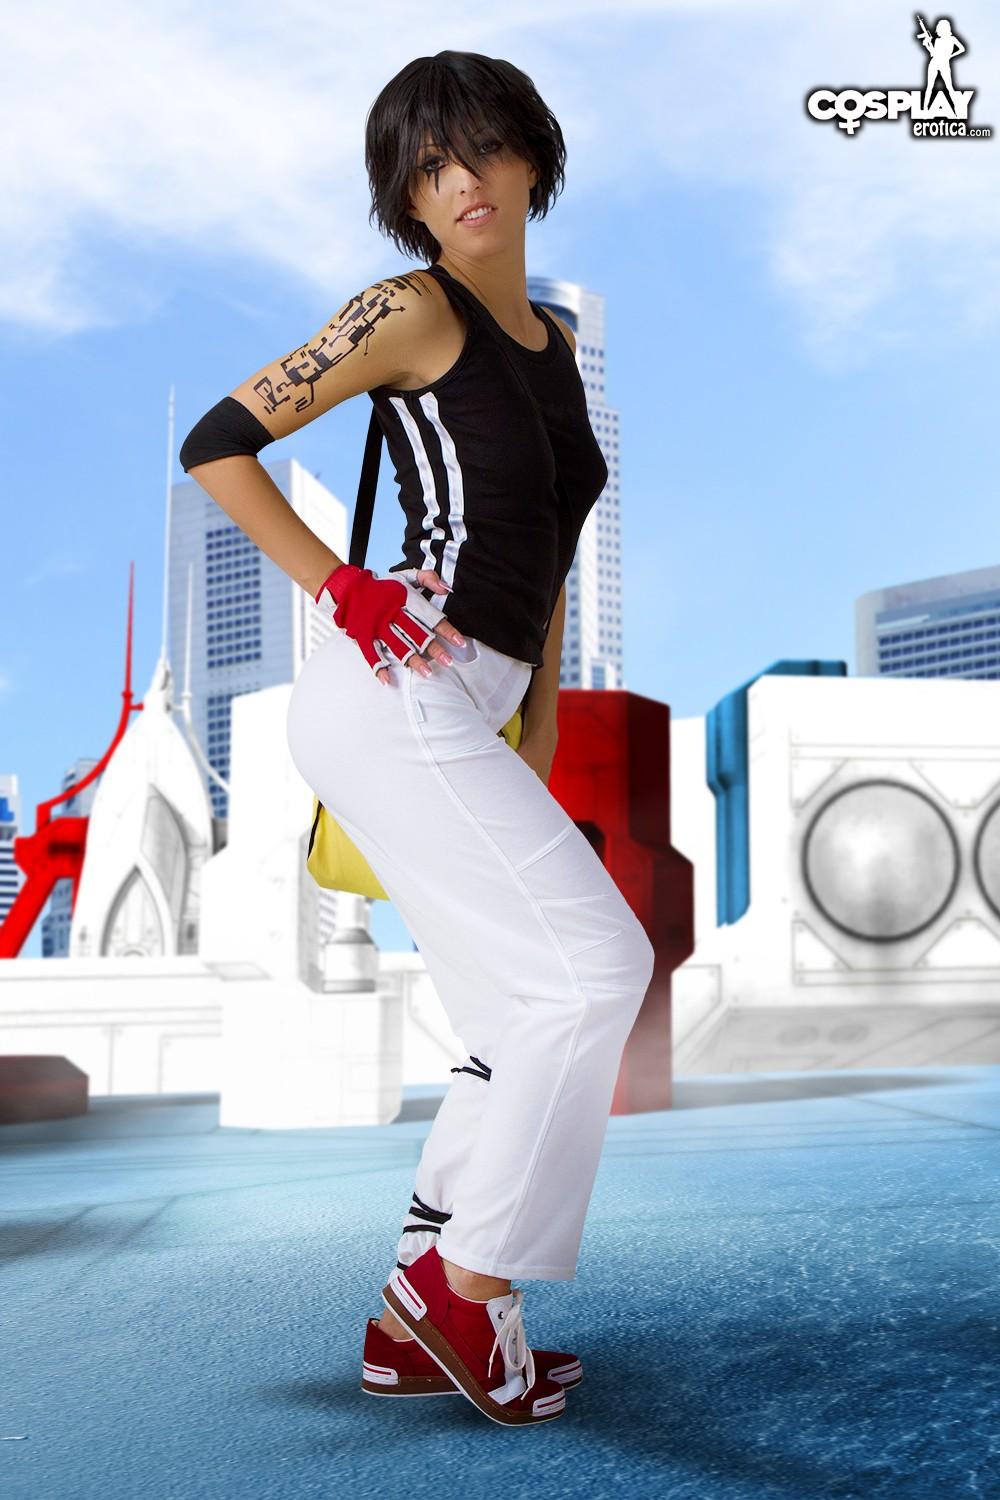 Sexy cosplay girl Anne poses as Faith from Mirror's Edge #53248607